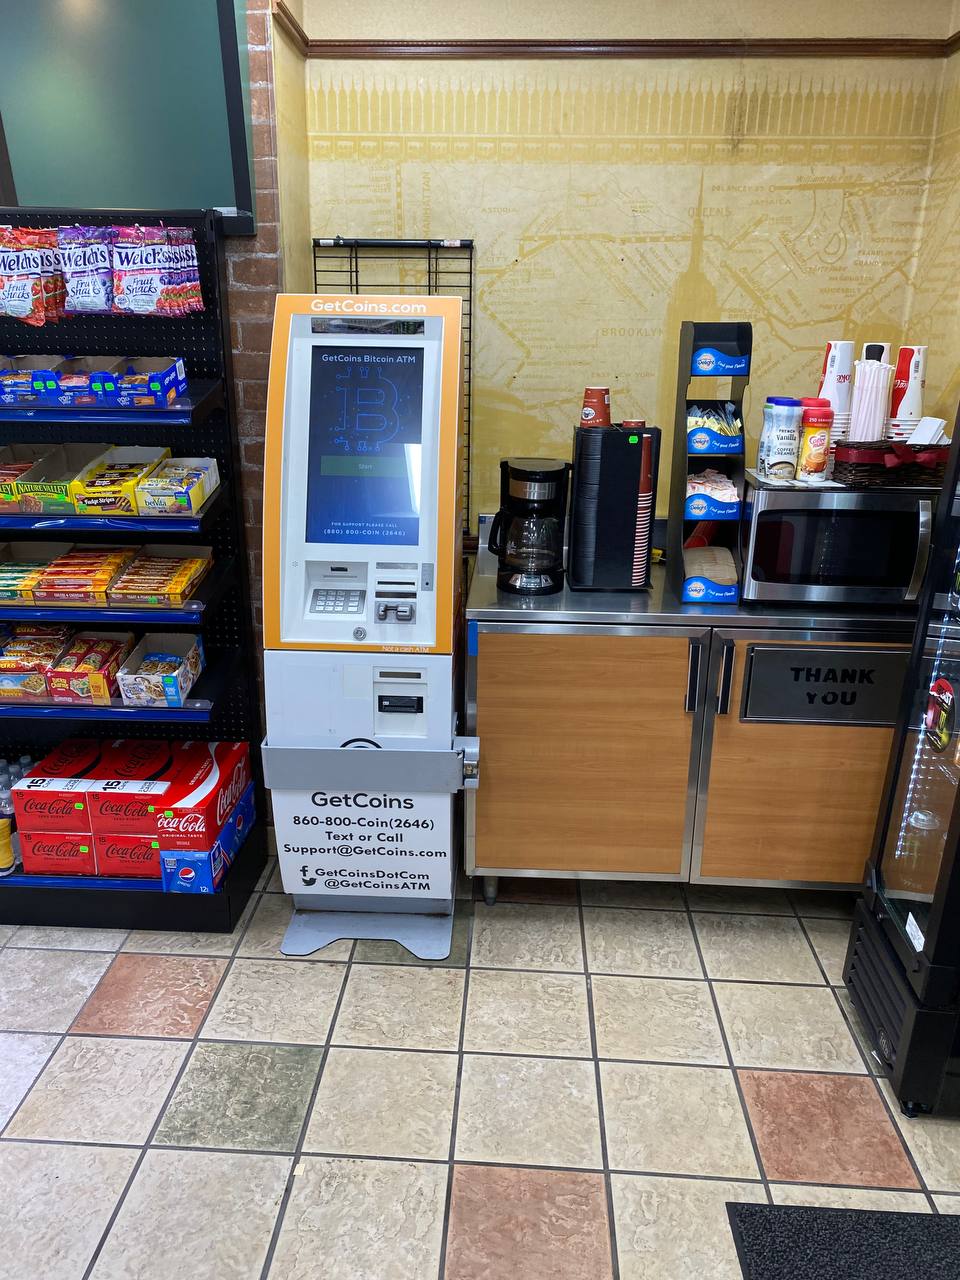 Getcoins - Bitcoin ATM - Inside of Gas 'N Go in Bel Air, Maryland